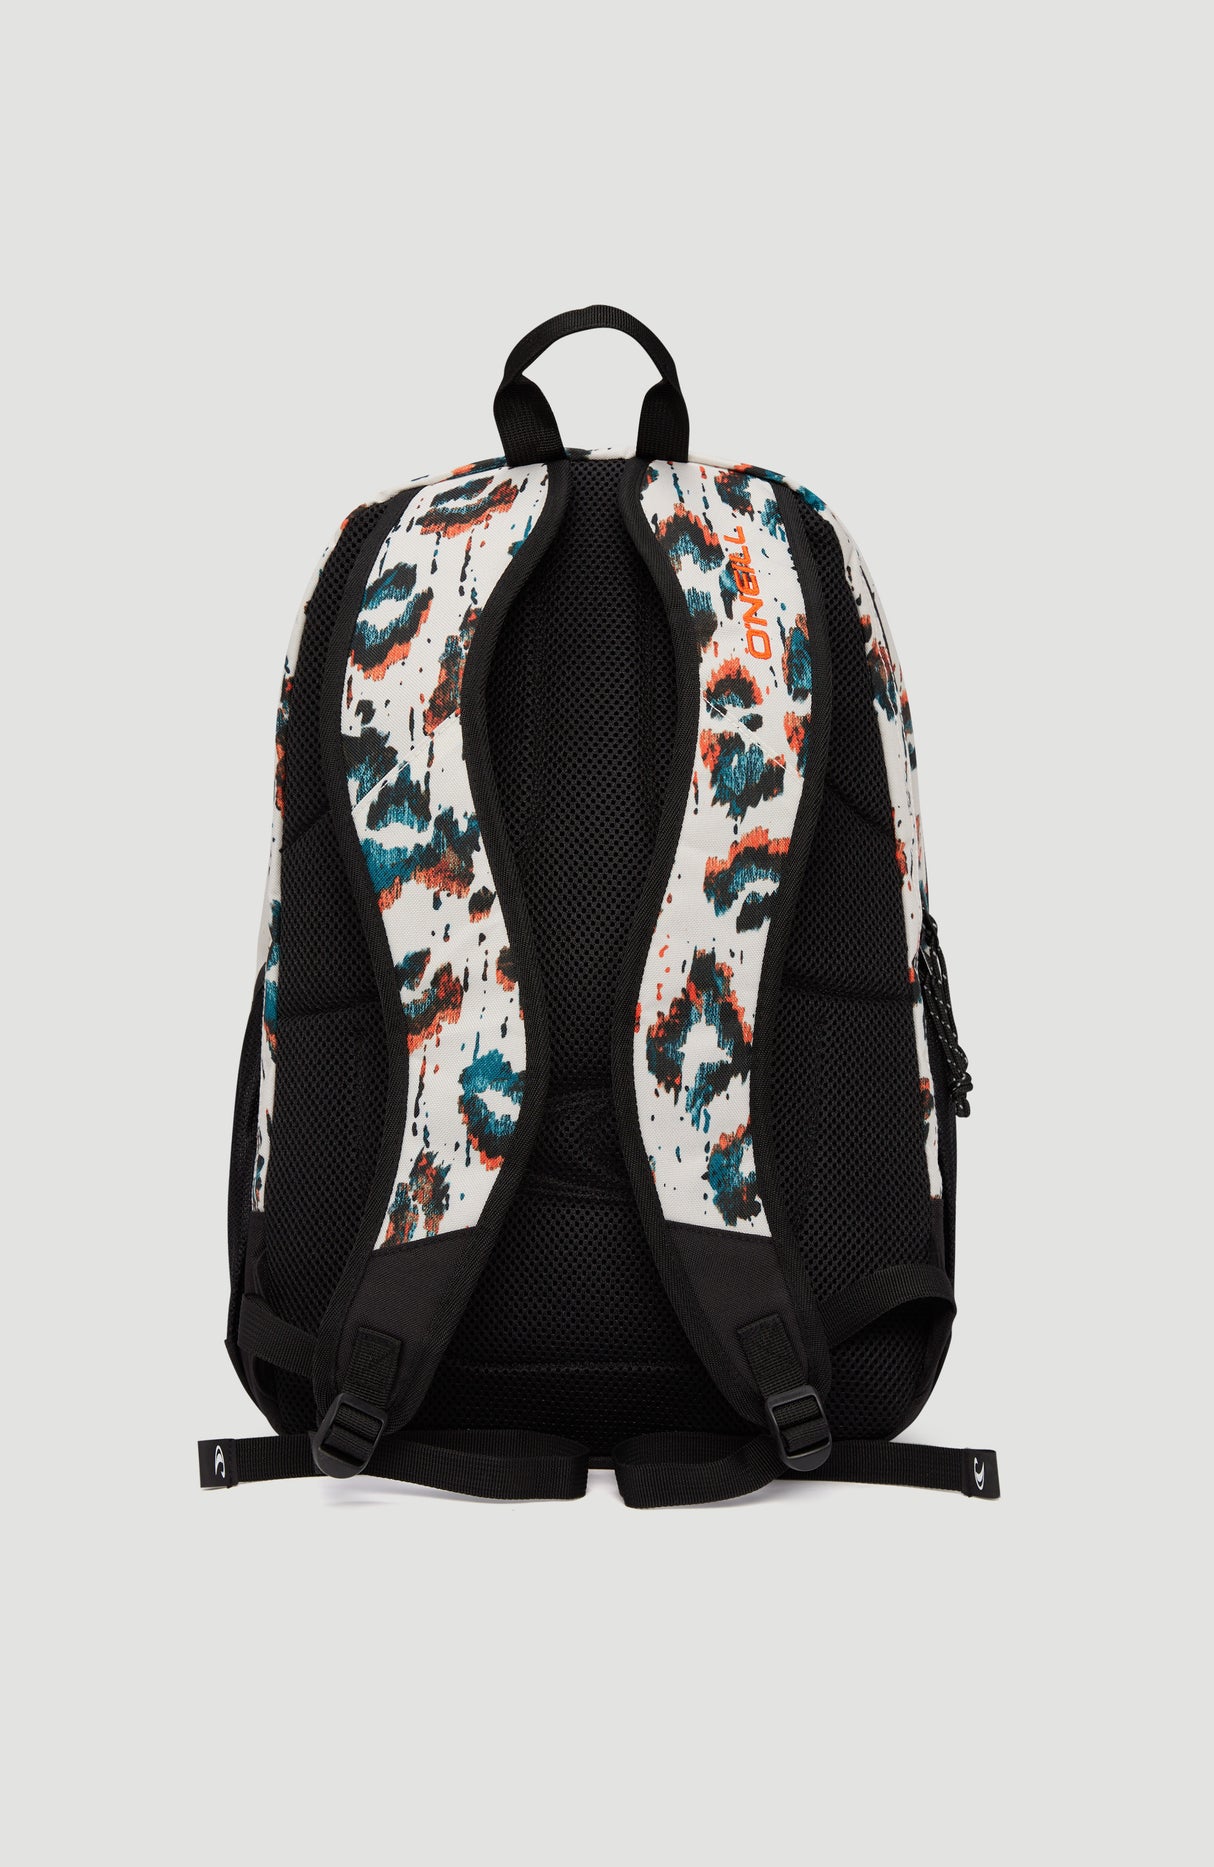 MOCHILA - WEDGE BACKPACK 25L - ABSTRACT ANIMAL - INVIERNO 2022